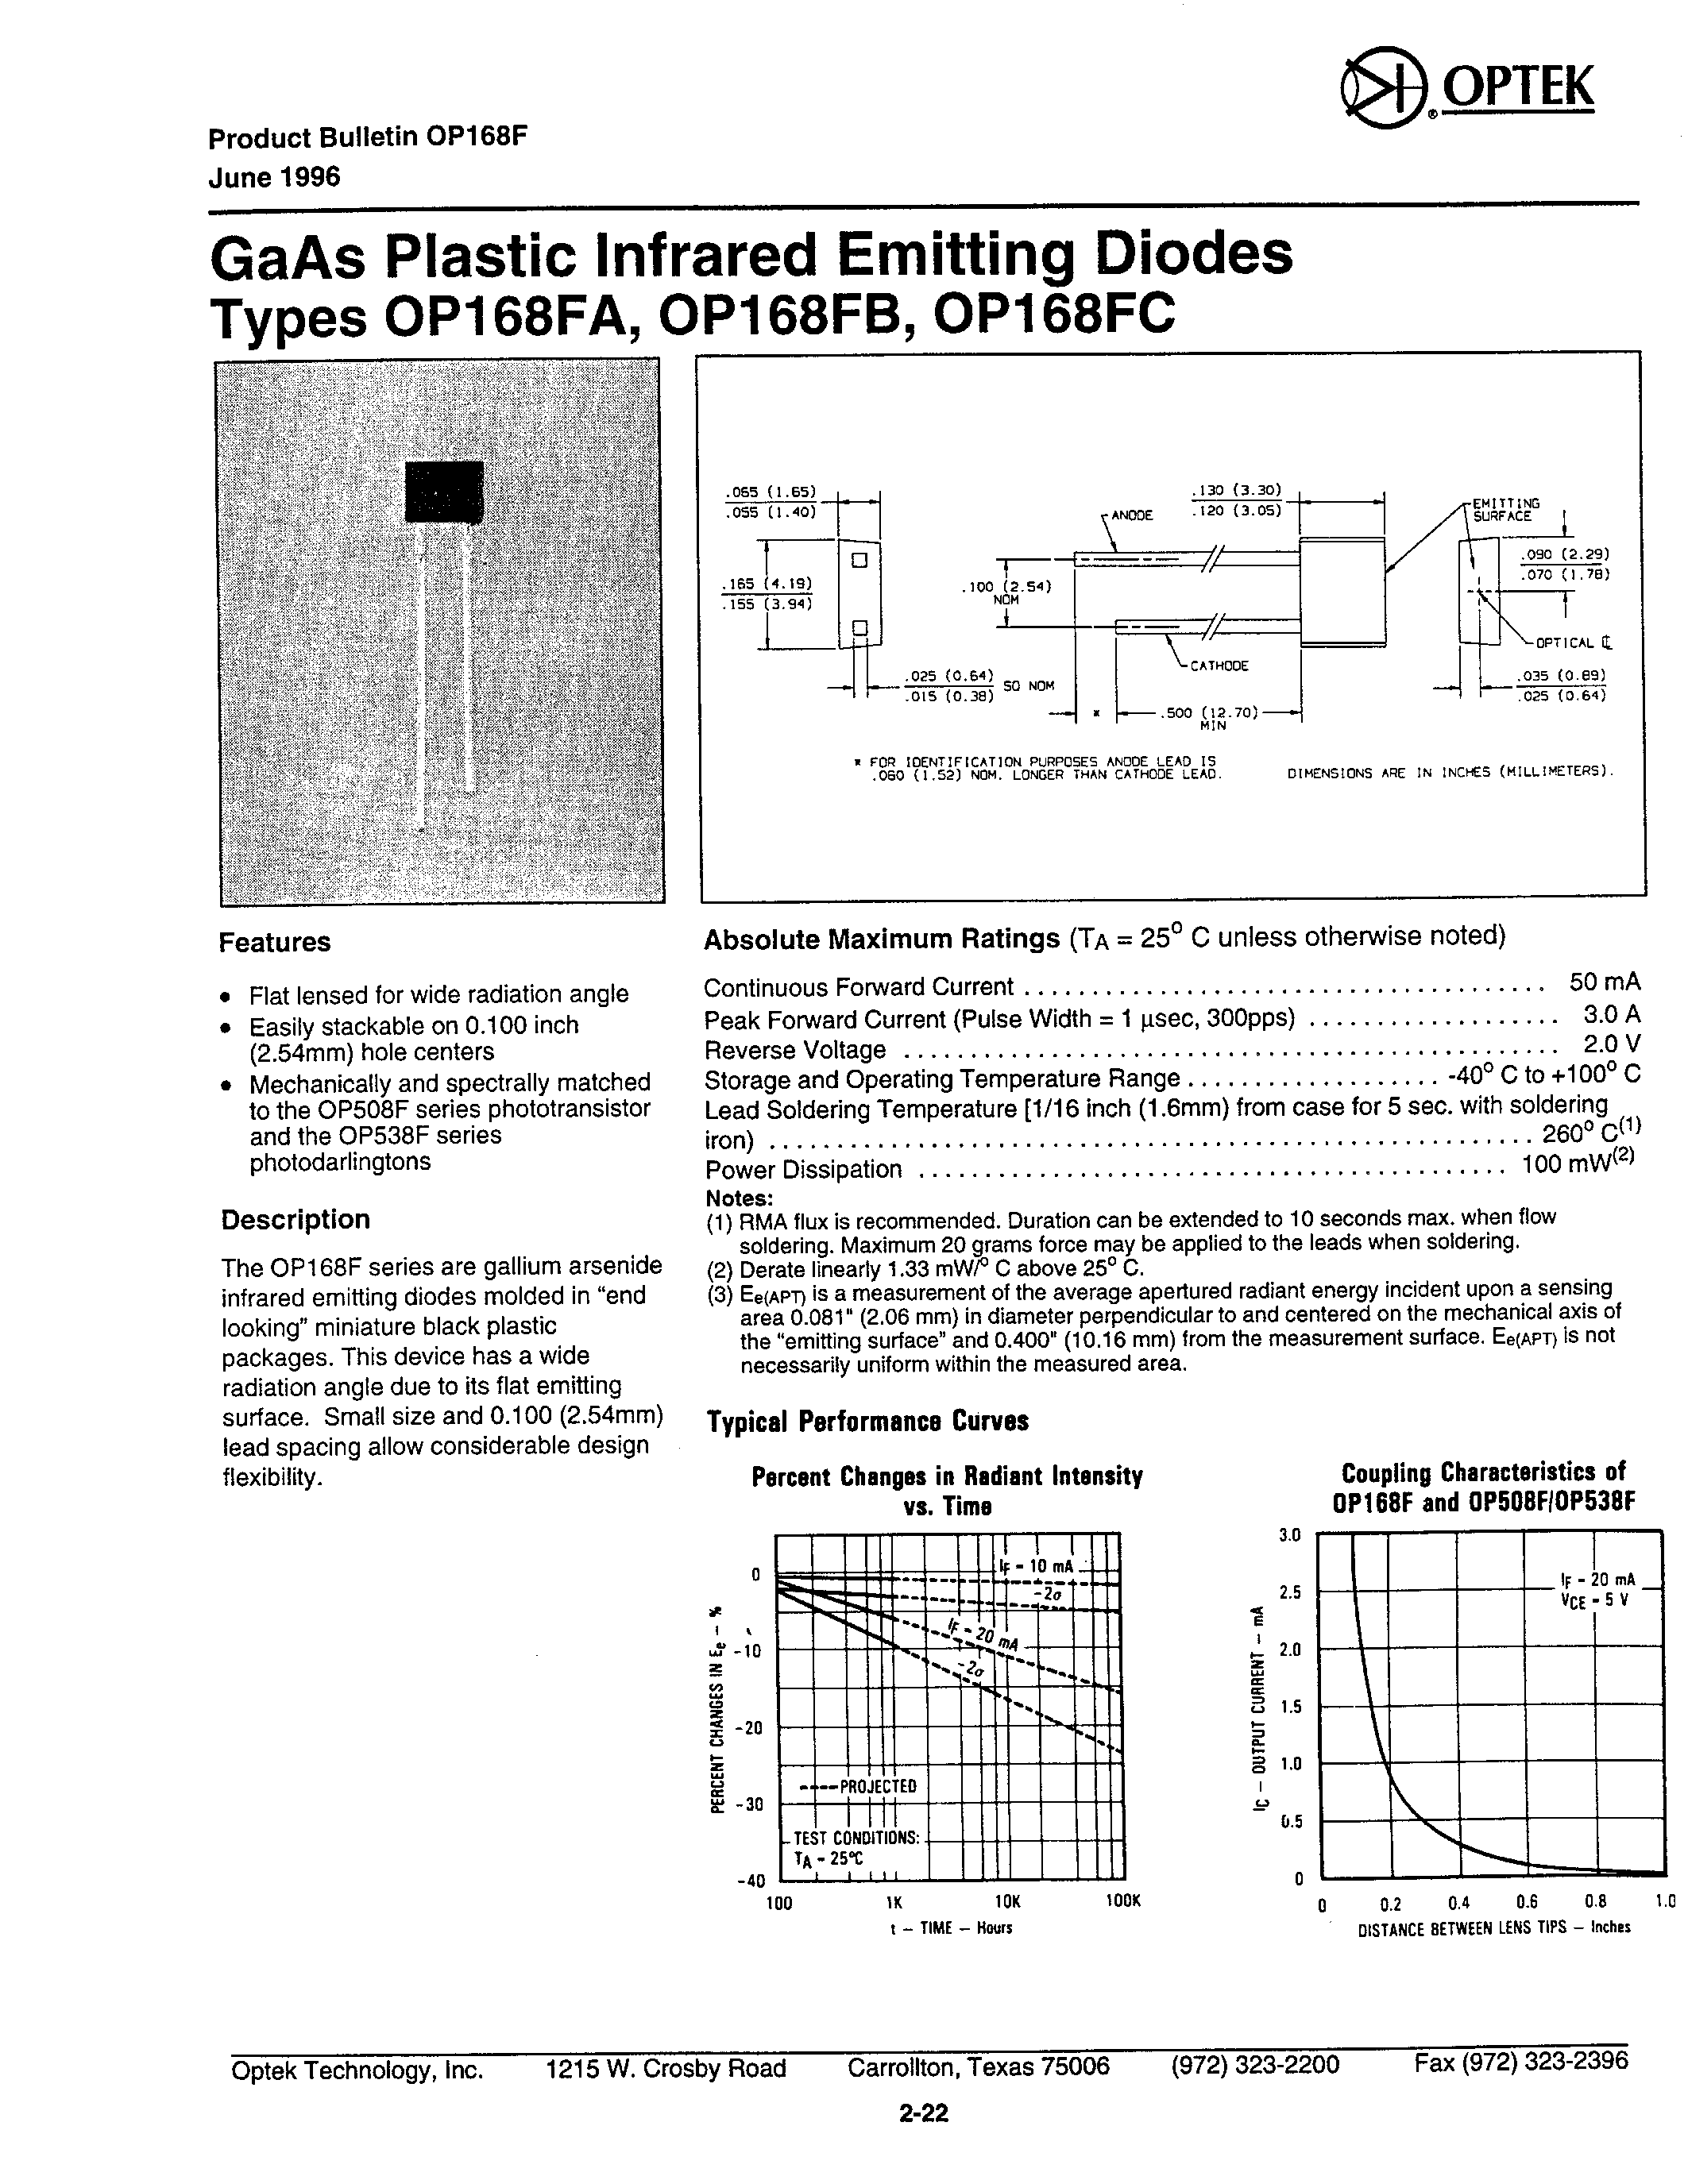 Datasheet OP168FA - GaAs Plastic Infrared Emitting Diodes page 2